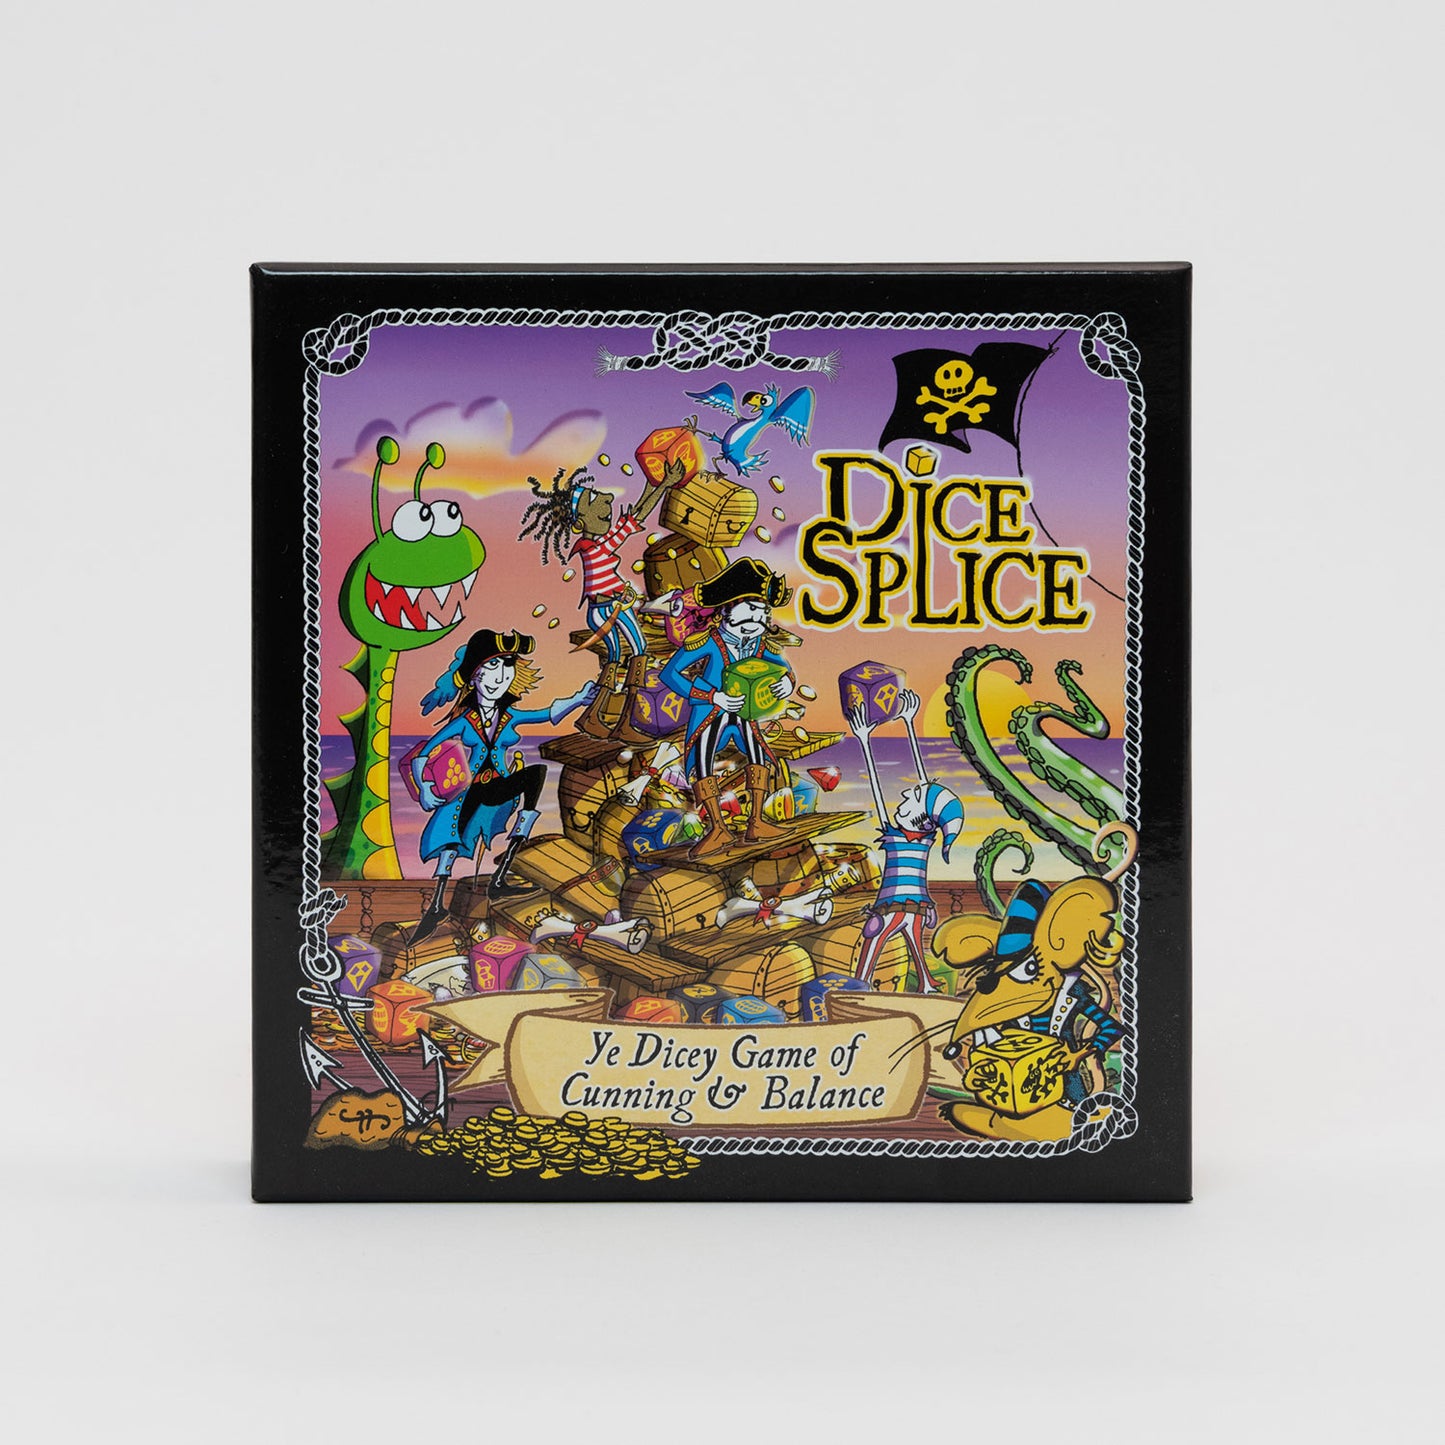 The box for Dice Splice which shows an illustration of pirates balancing a pile of treasure chests.